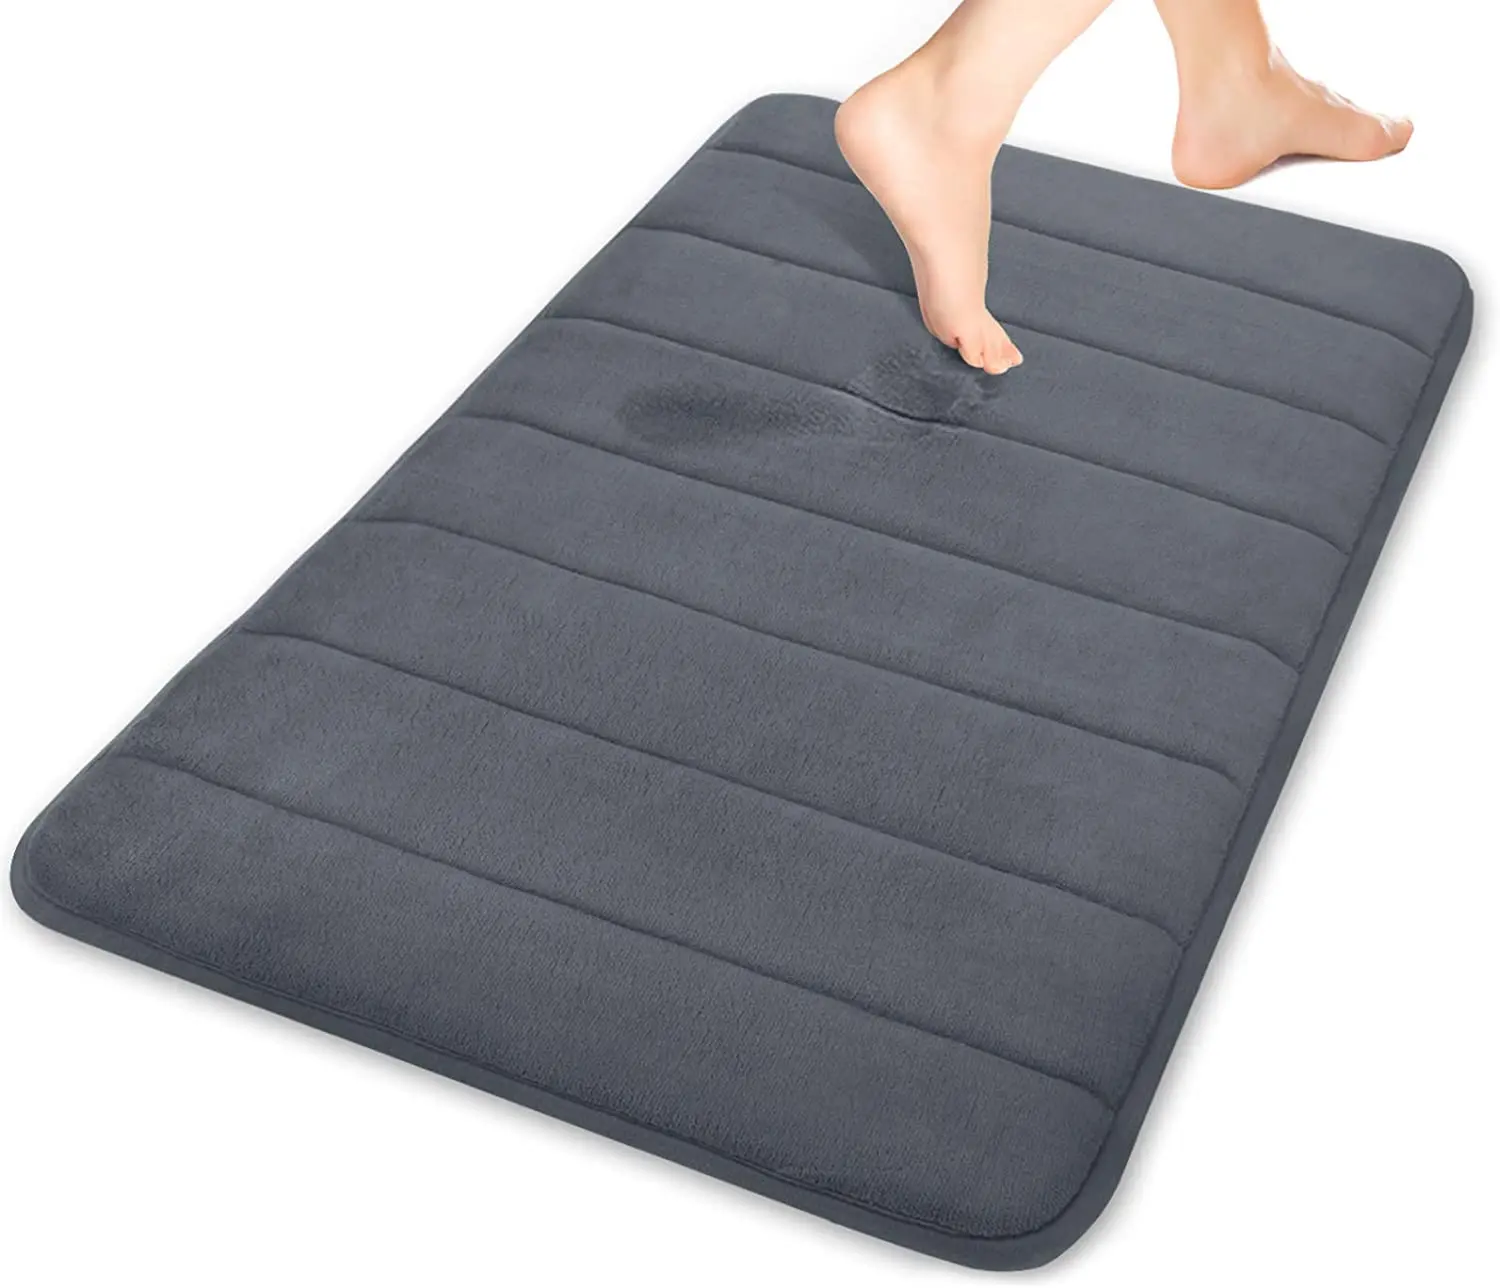 Memory Foam Bath Mat Large Size 24 X 17 Inches Dark Gray Square Soft And Comfortable Easier To Dry For Bathroom Floor Rug